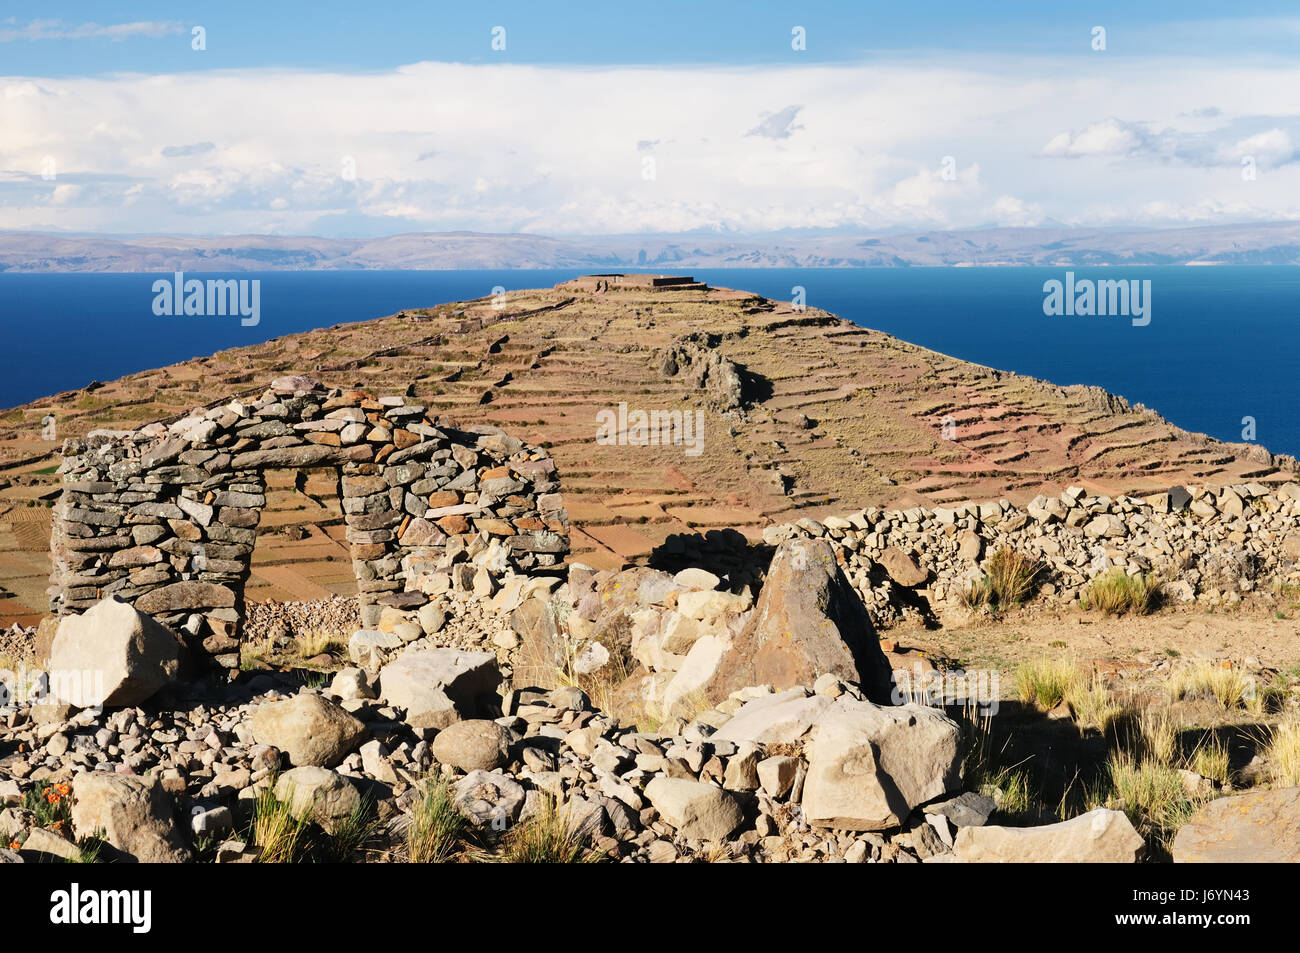 Peru, Amantani island on the Titicaca lake, the largest highaltitude lake in the world (3808m). This  picture presents ancient inca ruins Stock Photo